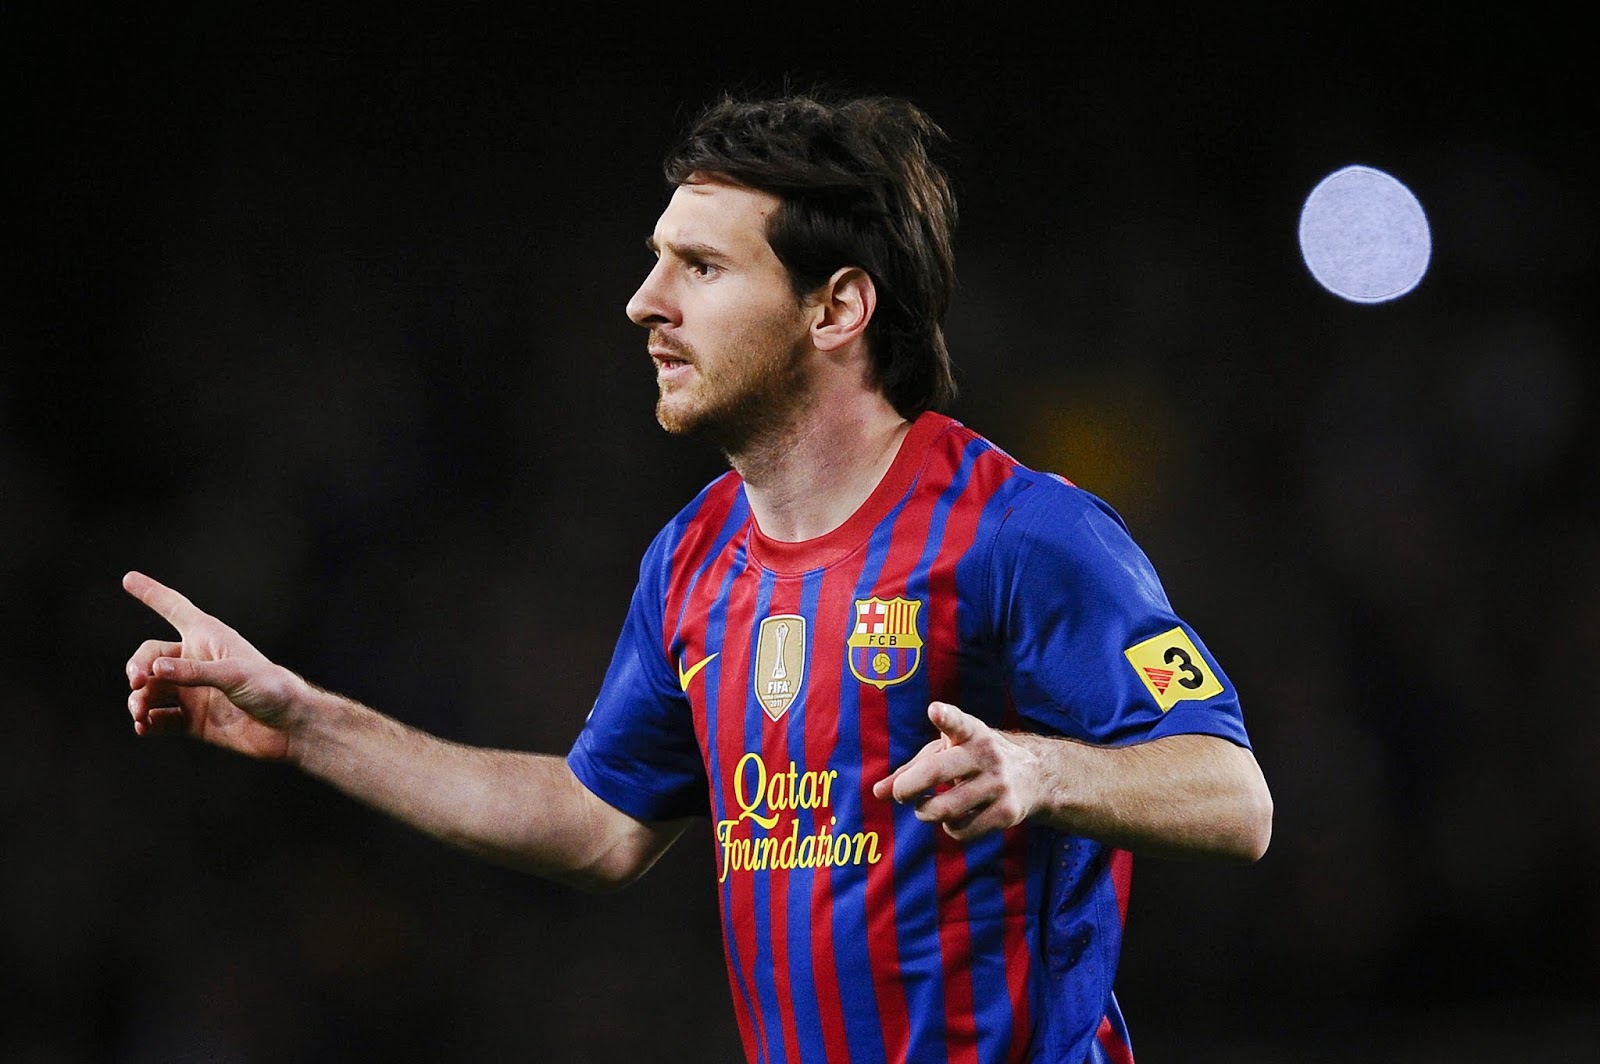 lionel messi hd wallpapers download lionel messi hd wallpapers 1600x1064